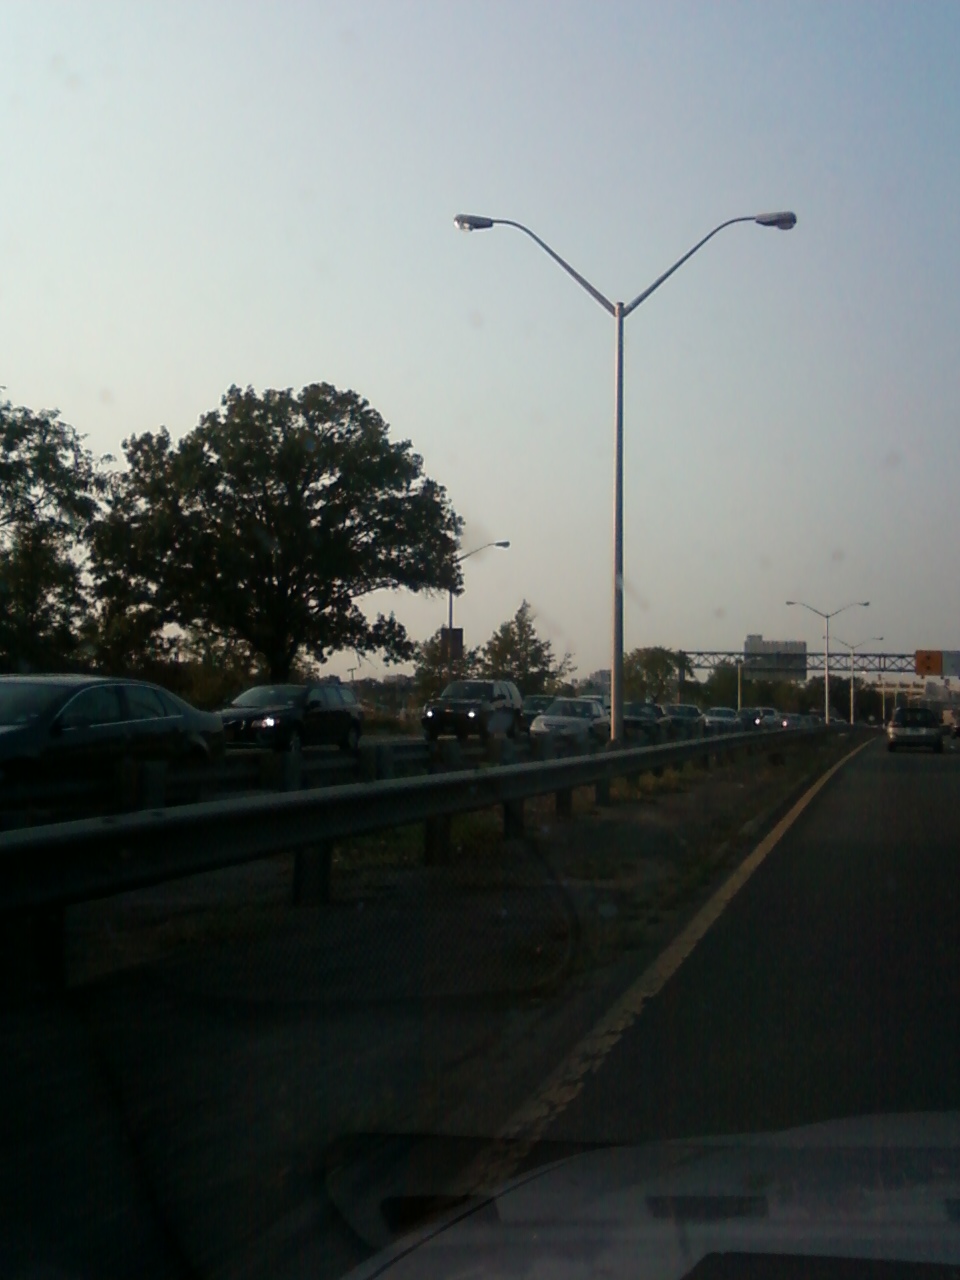 08/20/2011- I-678 south, Bronx County, NY, north of the Whitestone Bridge toll plaza, traffic is backed up for over two miles. Further details are available 
at http://www.wirelessnotes.org/tolls/